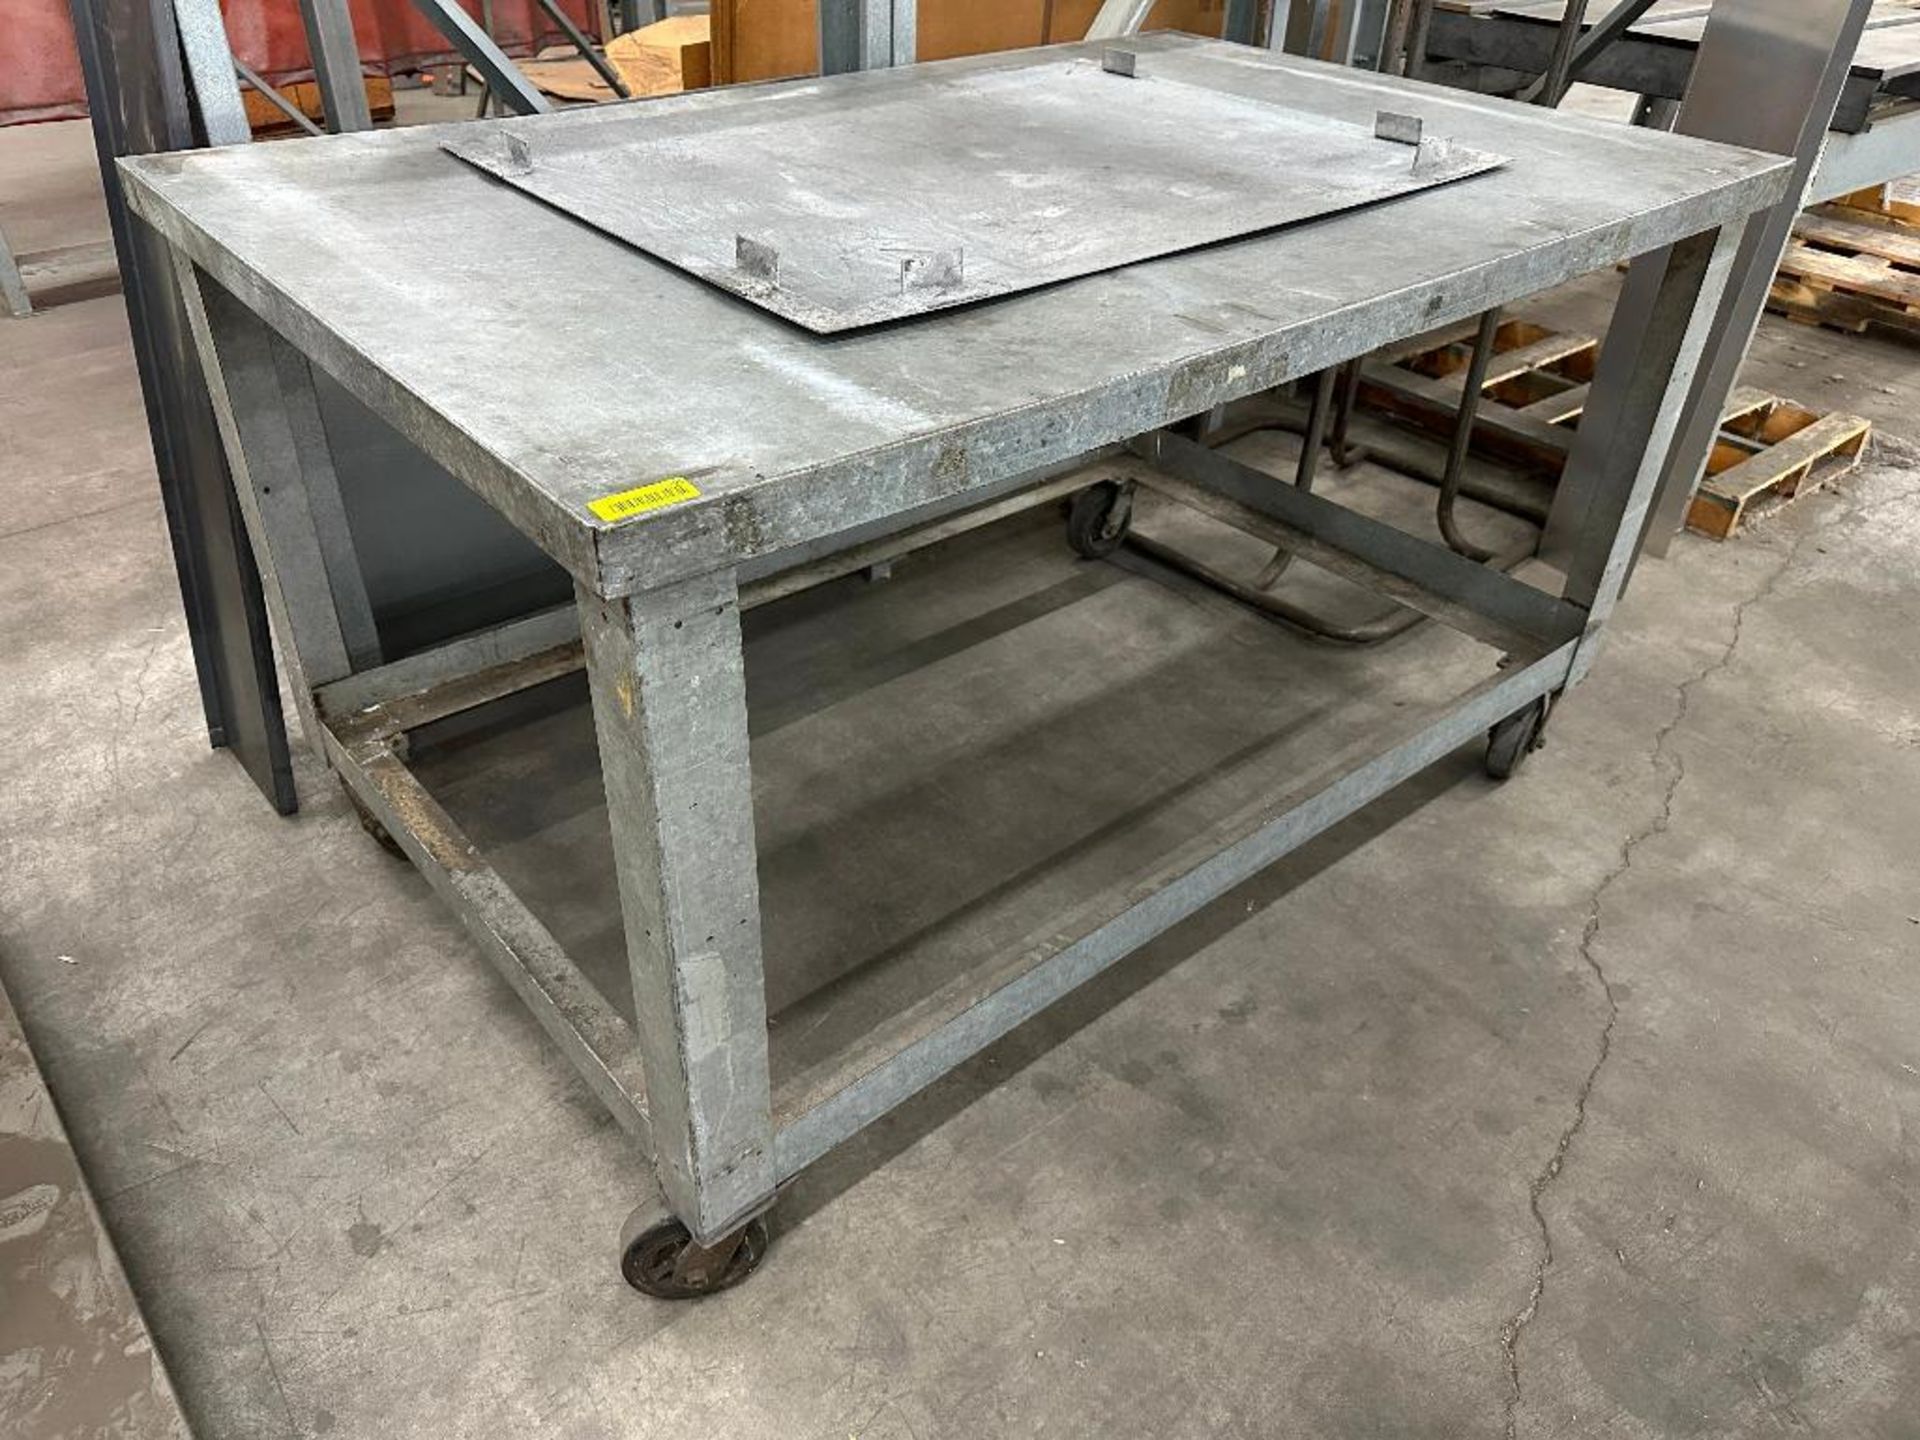 66" X 42" METAL FABRICATION TABLE ON CASTERS - Image 2 of 4